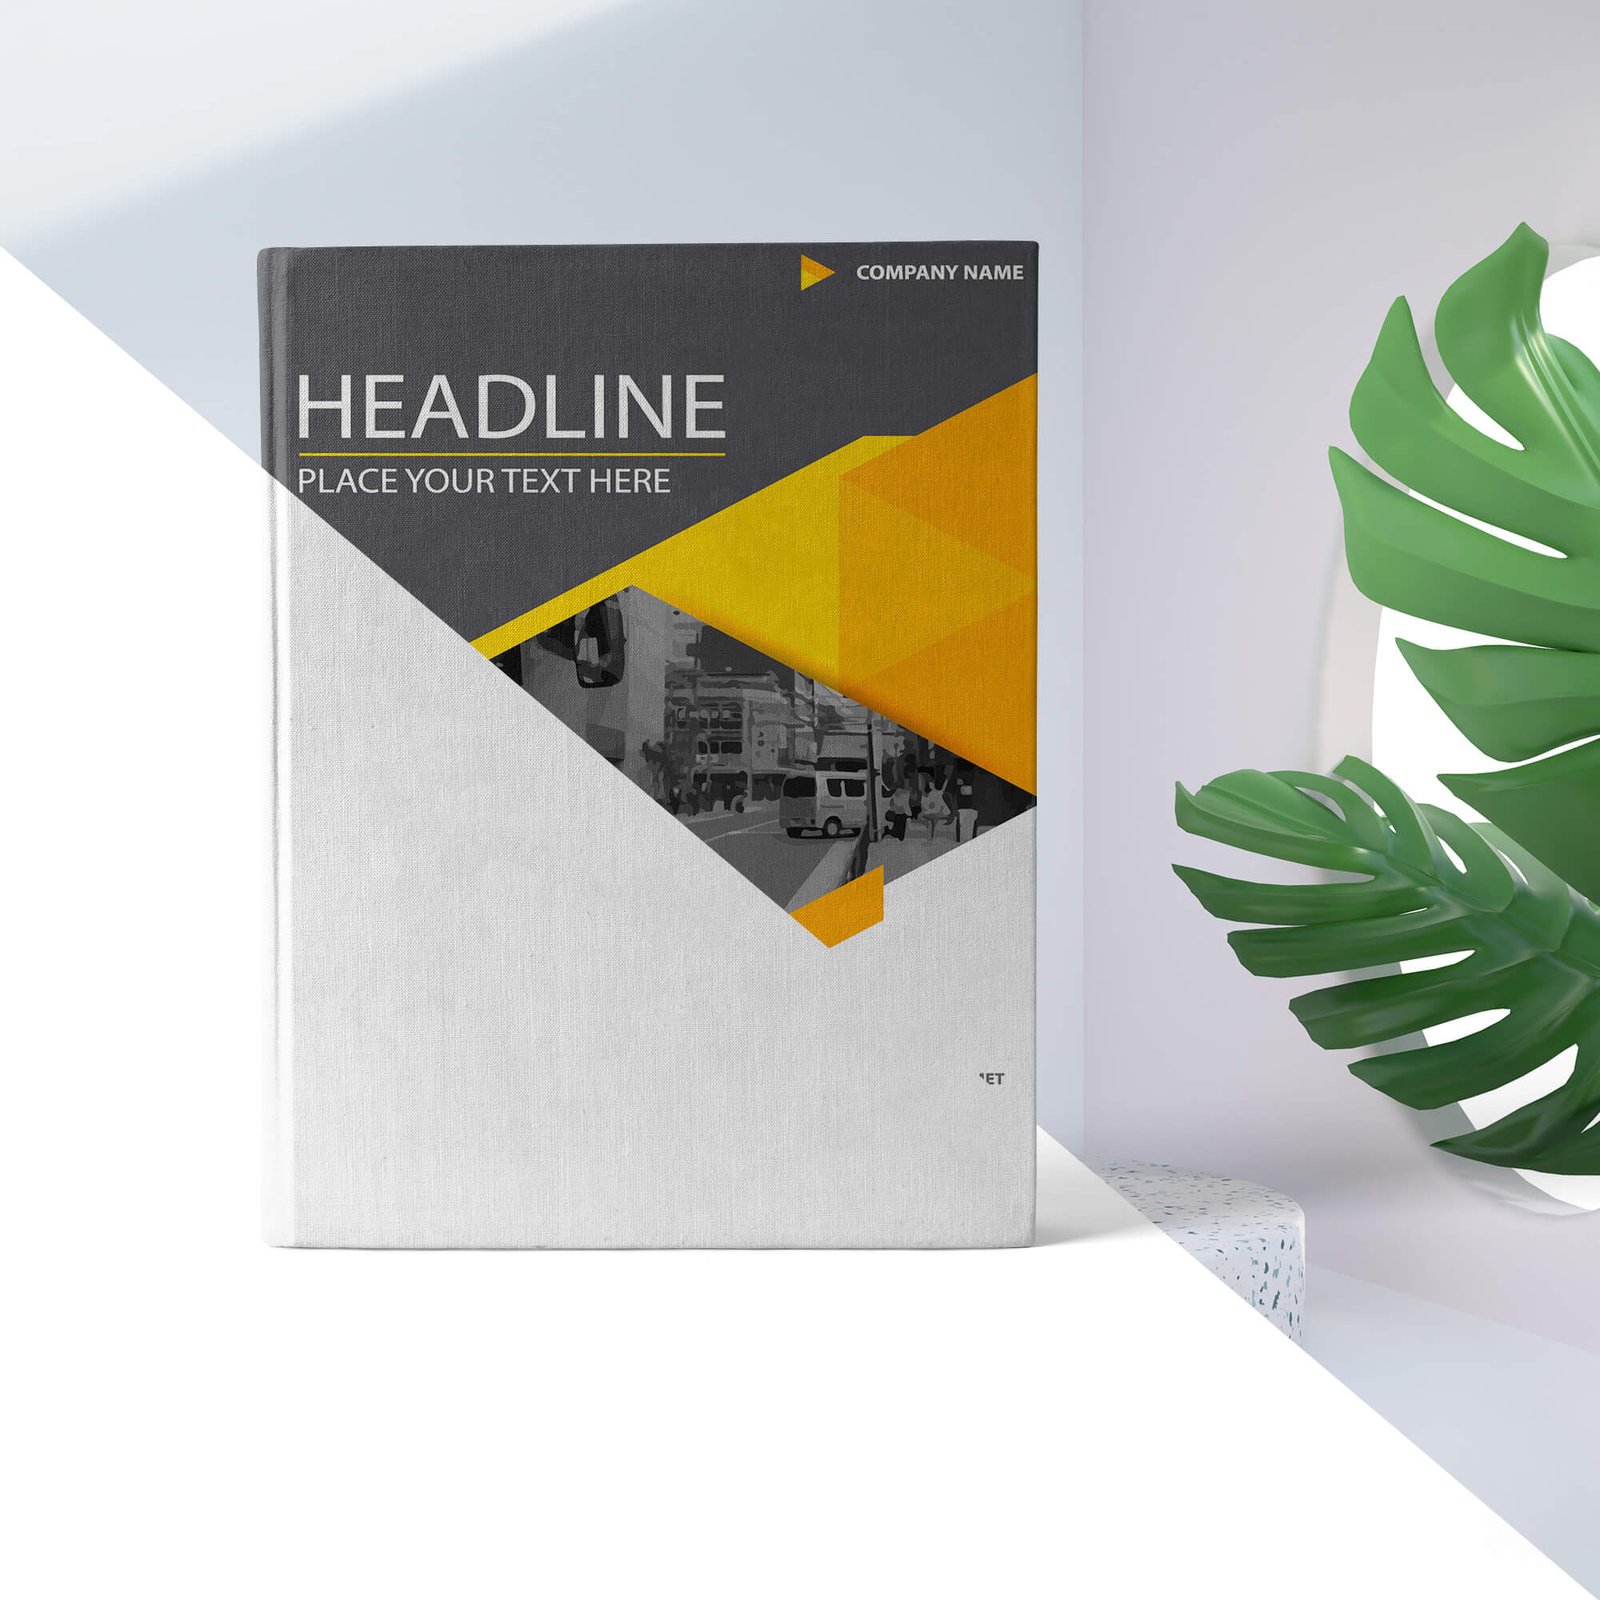 Editable Free Book Cover PSD Mockup Template